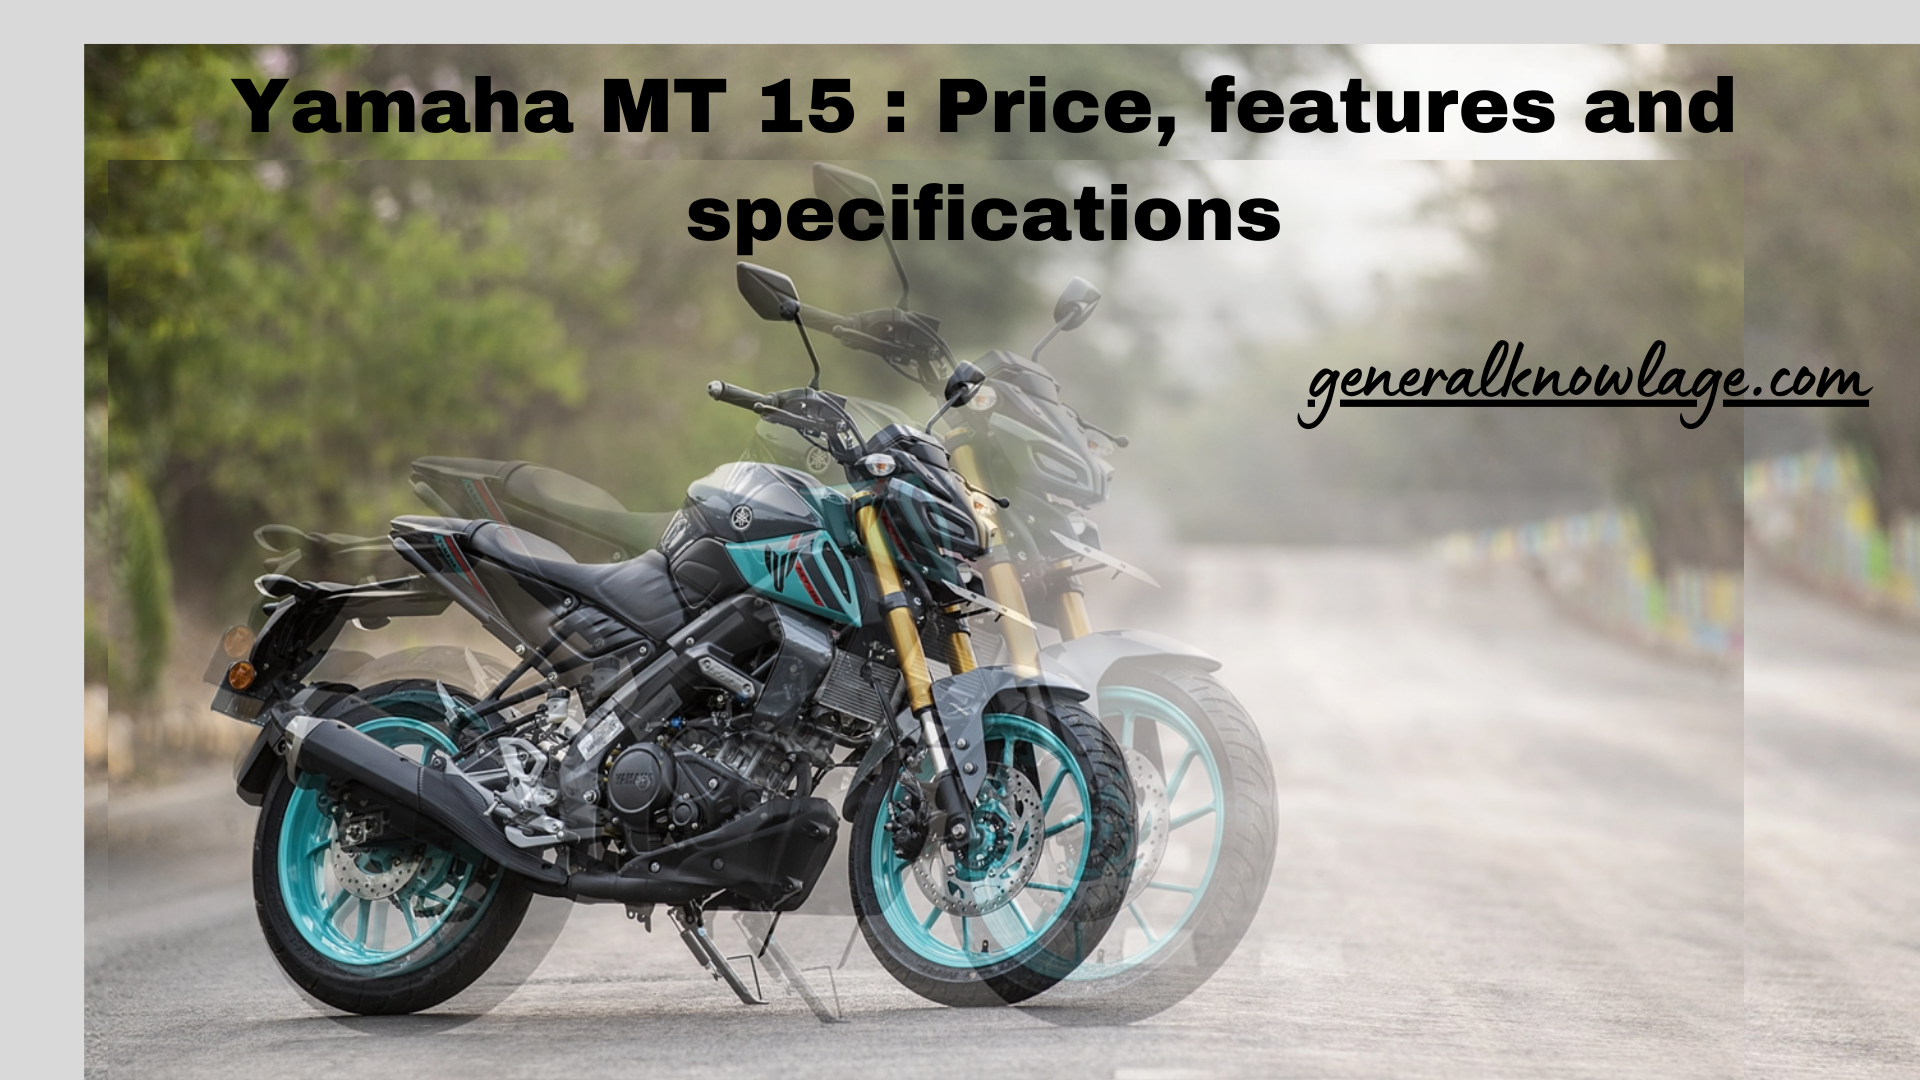 Yamaha MT 15 : Price, features and specifications